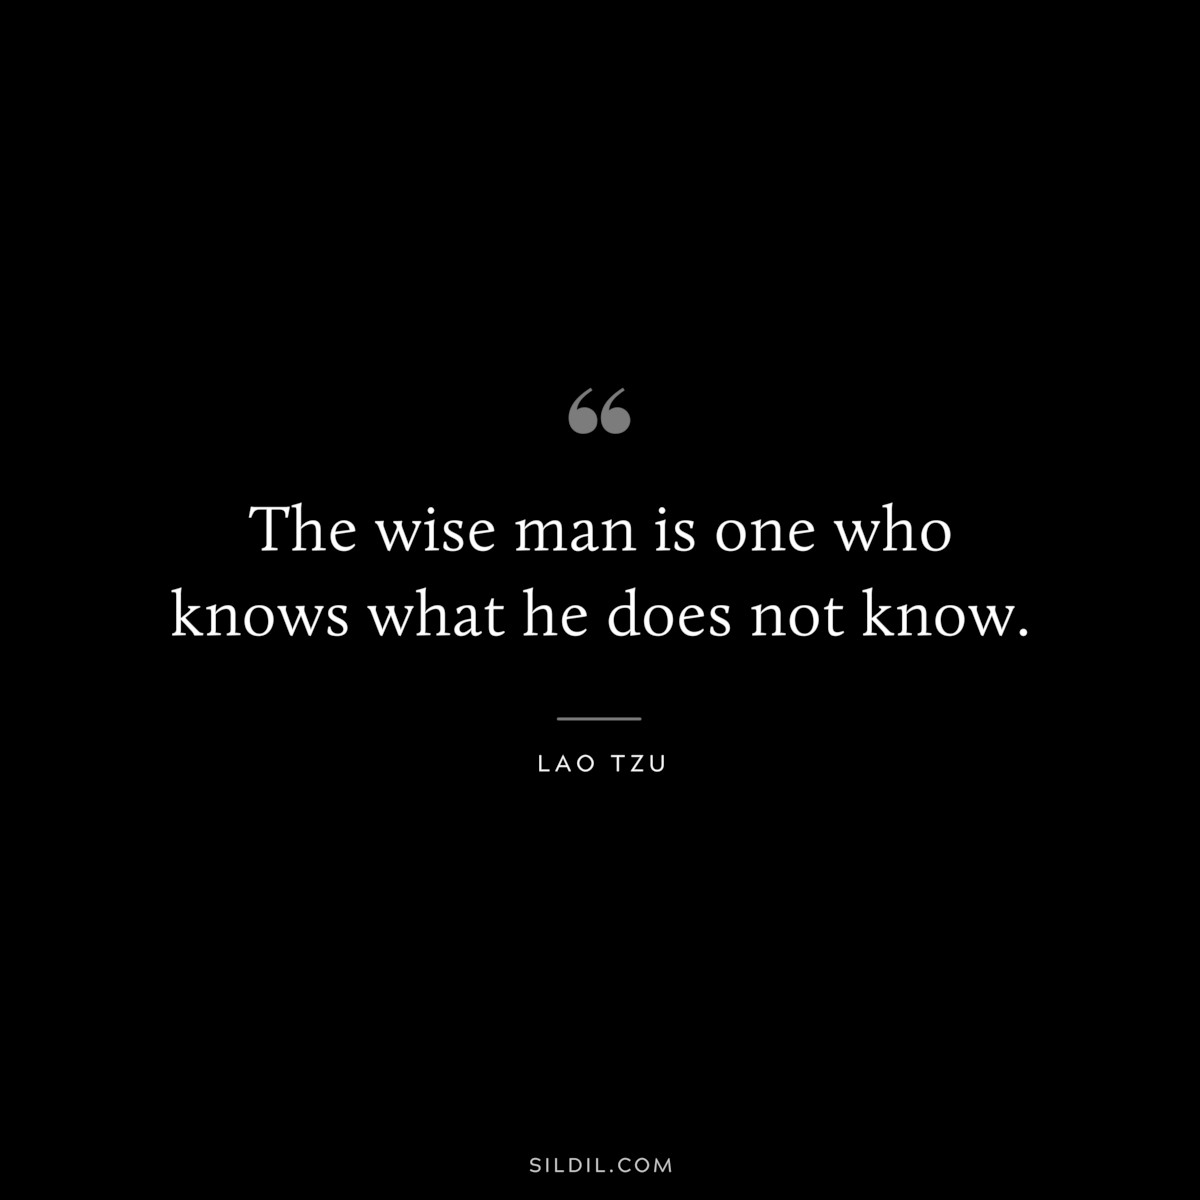 The wise man is one who knows what he does not know. ― Lao Tzu